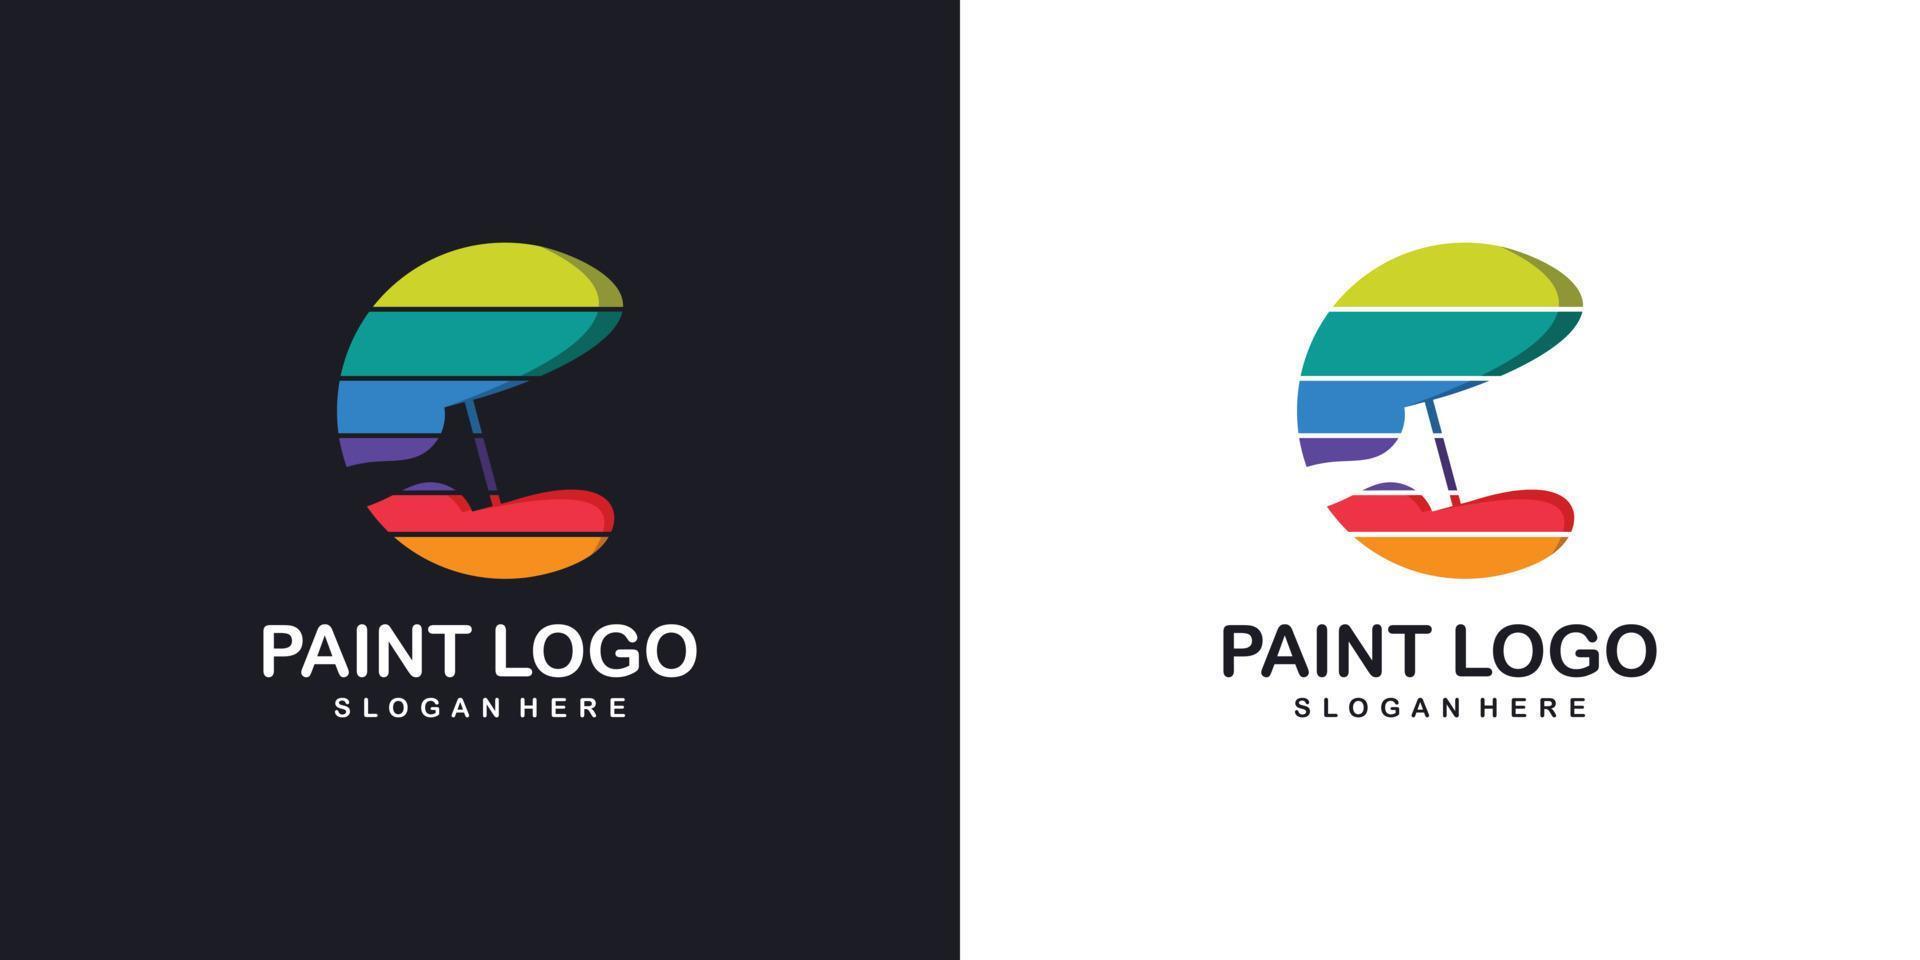 Paint logo with modern creative abstract concept Premium Vector part 6